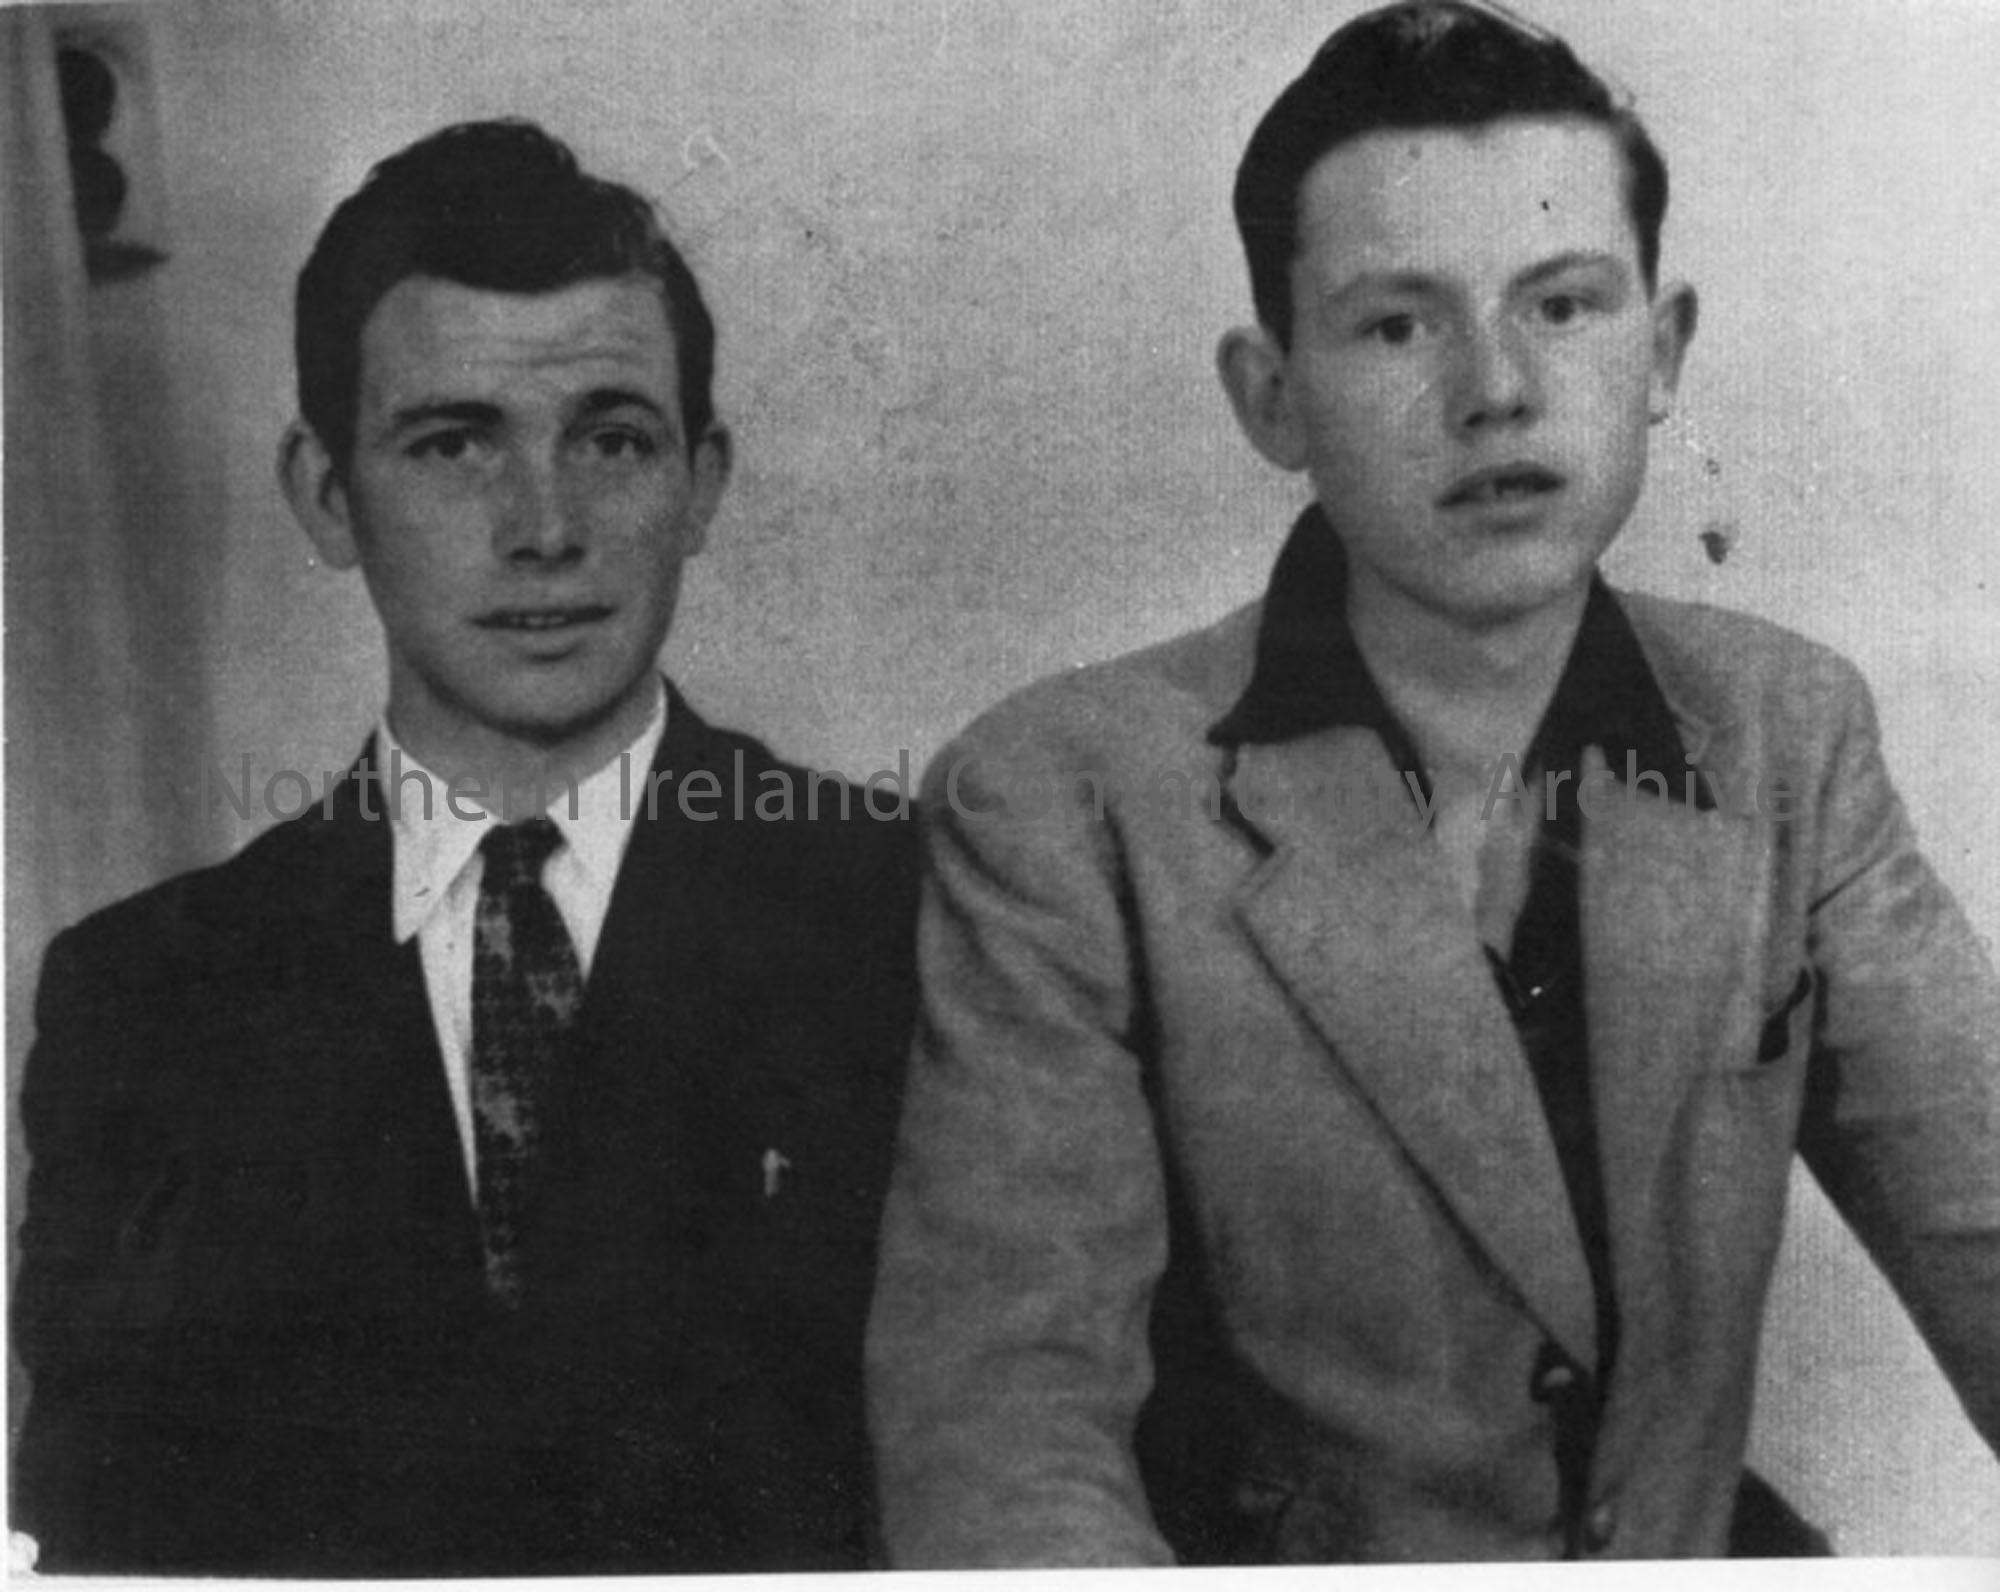 copy of a black and white photograph of the Tommy McIntyre and Steven McDowell taken in 1956 in Dan Biggart’s shop, Main Street, Ballymoney. Cost for …